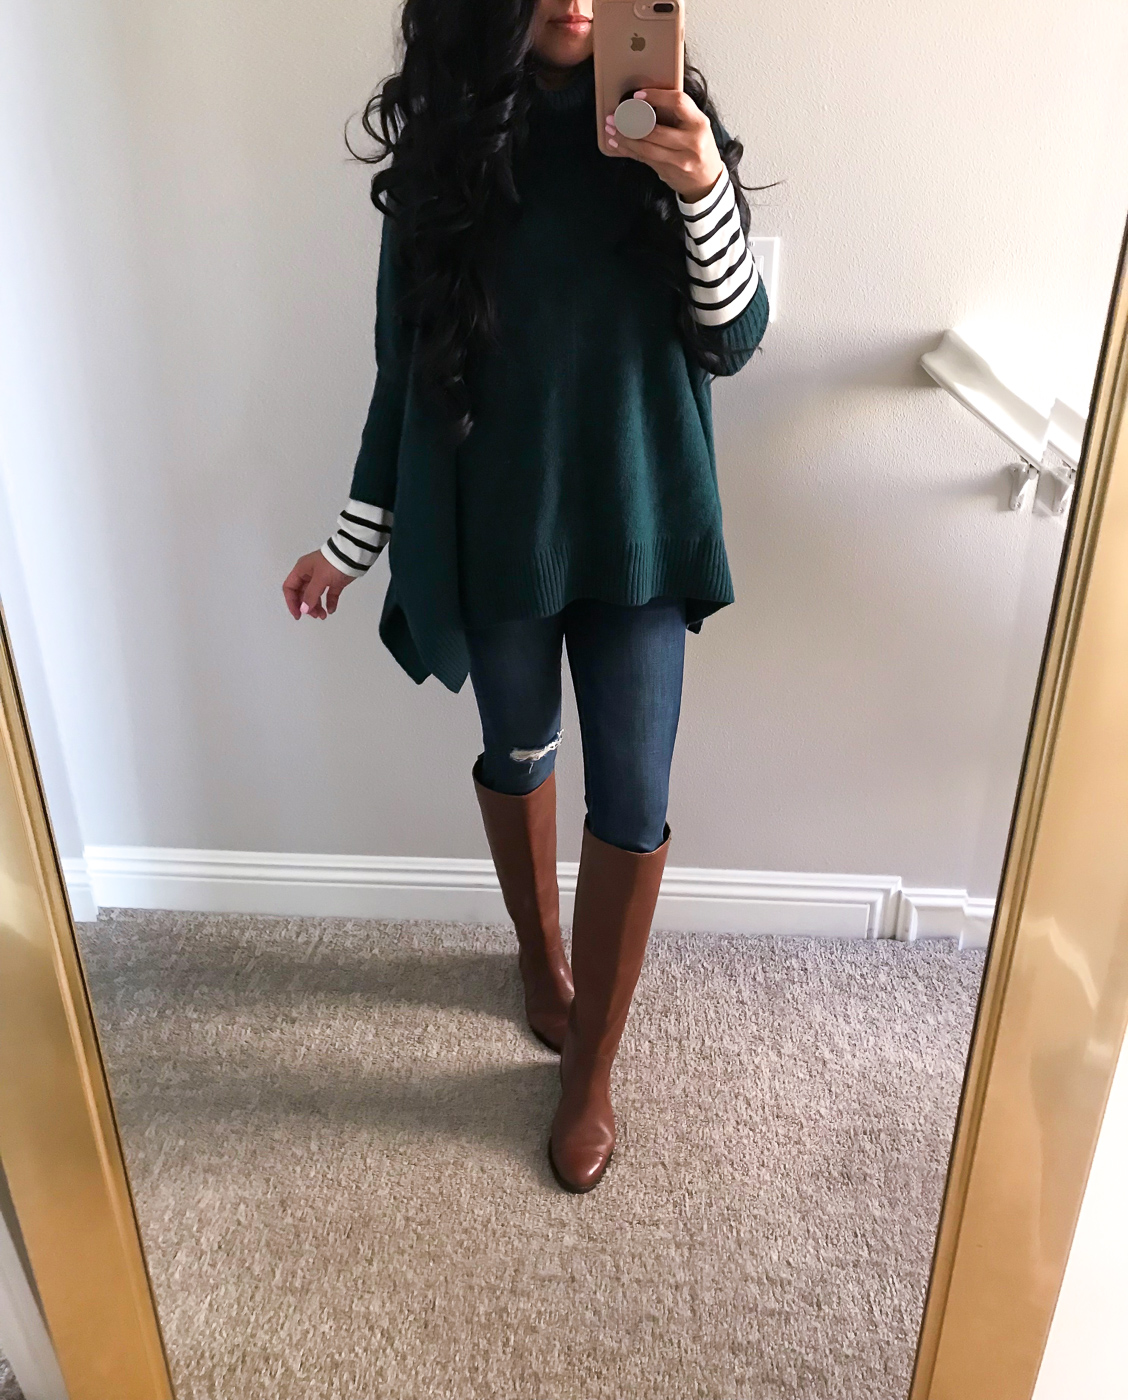 petite poncho striped shirt cognac riding boots petite jeans fall outfit